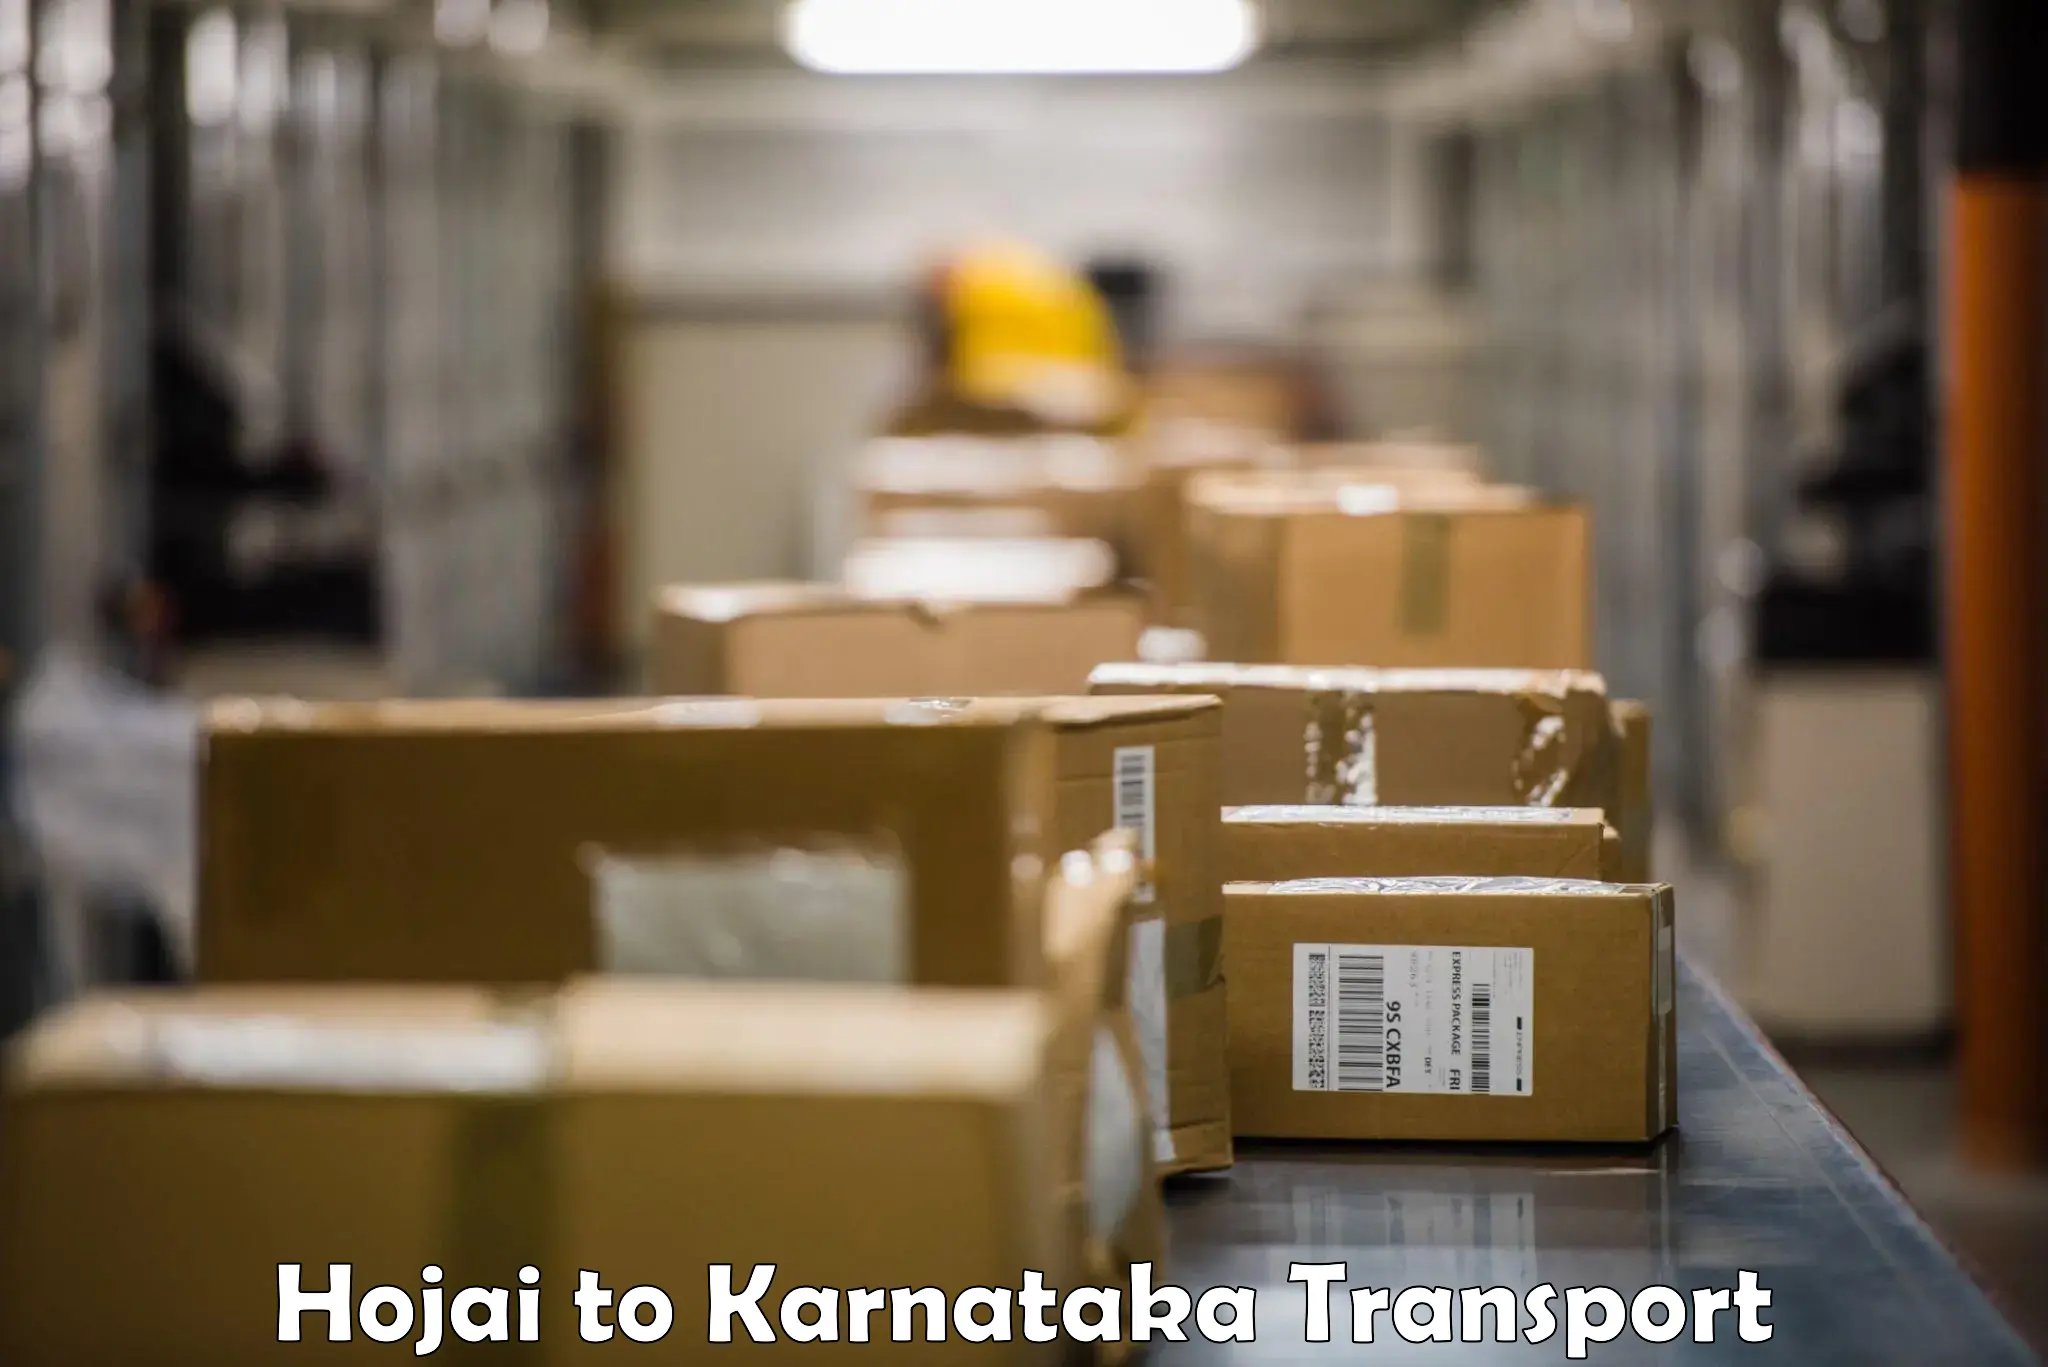 Transport shared services Hojai to Bangalore